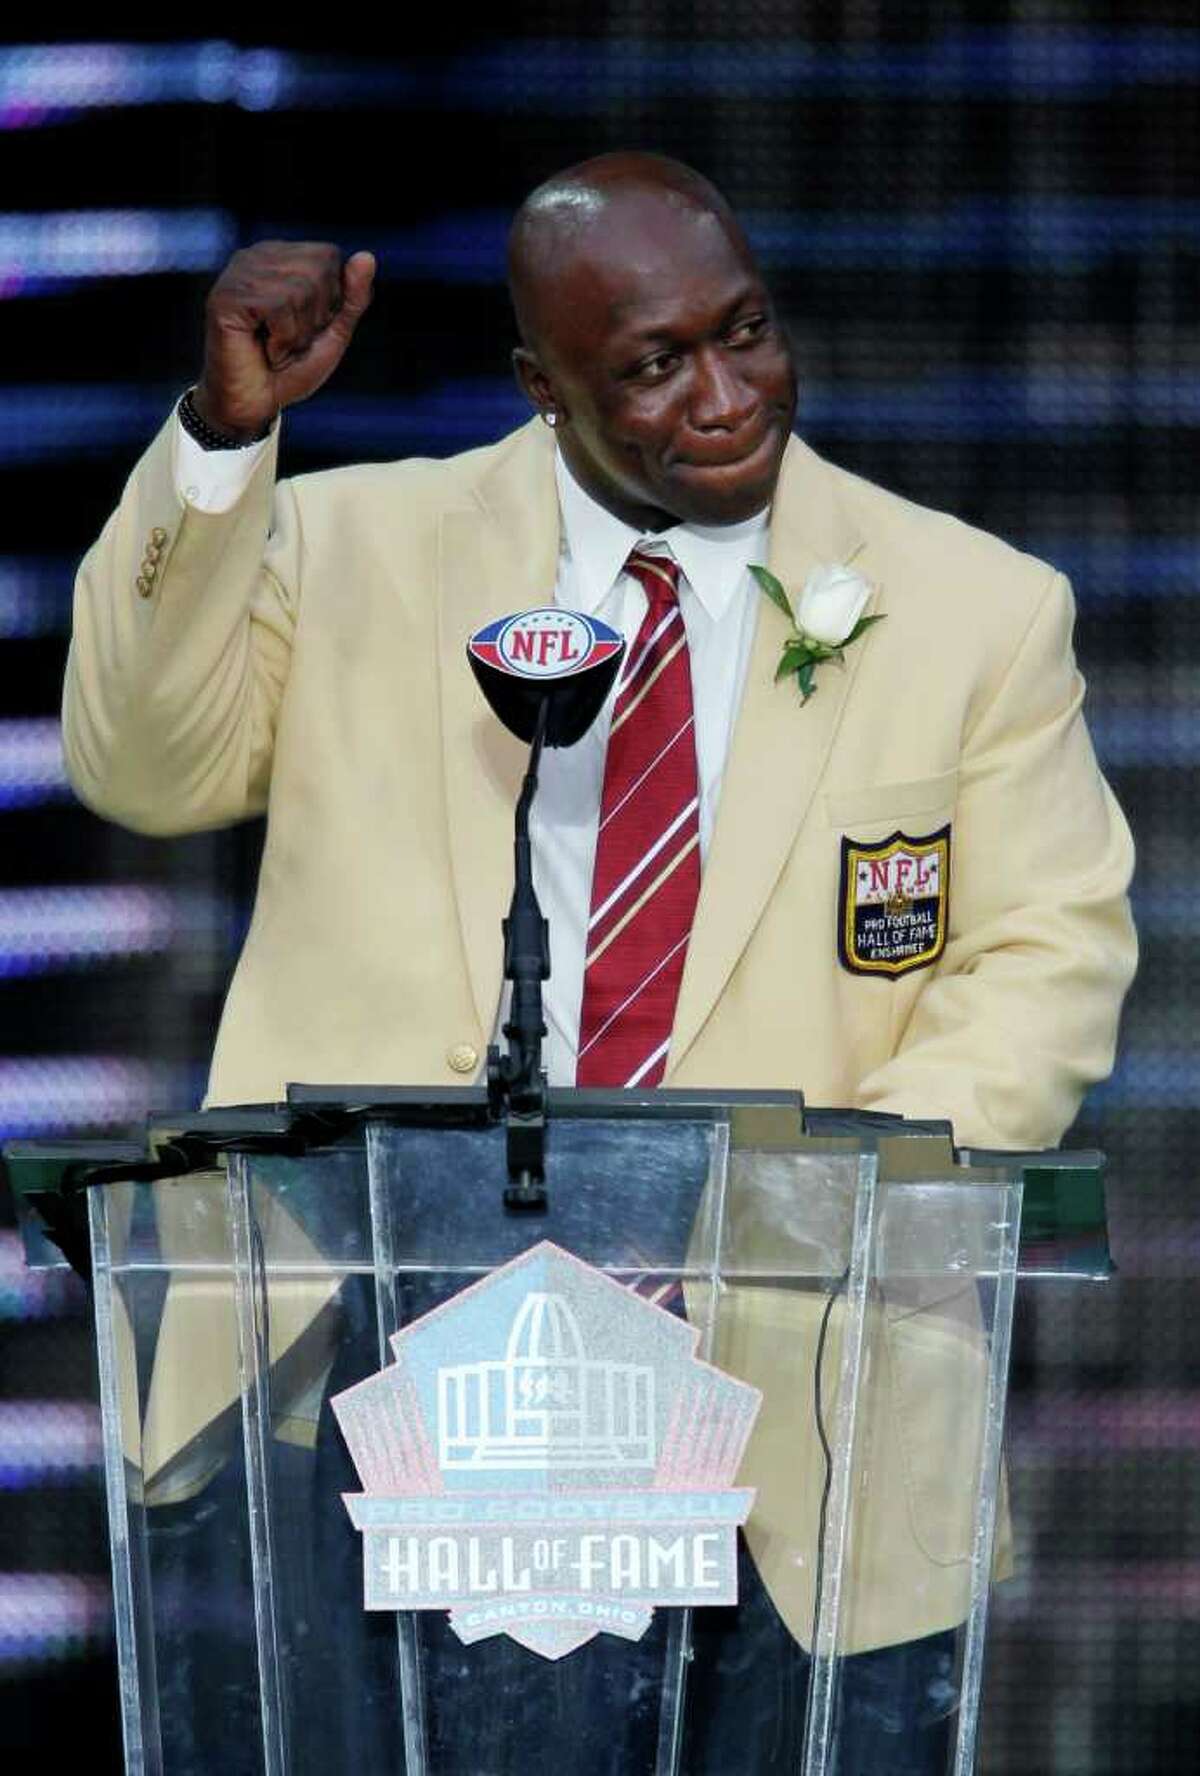 Former Minnesota Vikings great John Randle pumps his fist during his enshrinement in the Pro Football Hall of Fame in Canton, Ohio, on Saturday, Aug. 7, 2010.